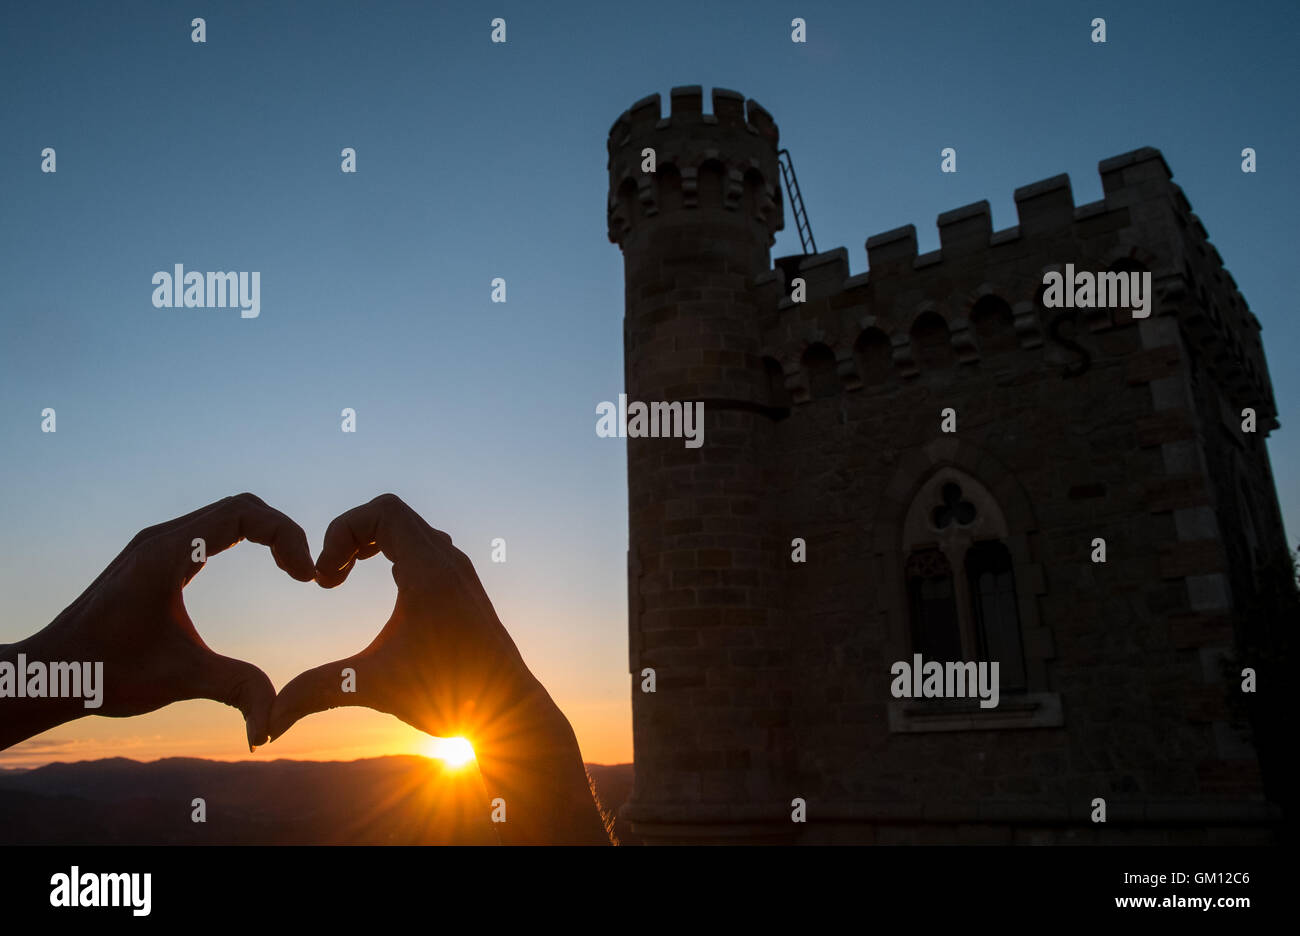 Sunset at Tour Magdala,Magdala Tower, Chateau of history and mystery at Rennes le Chateau,hilltop village in Aude. Stock Photo